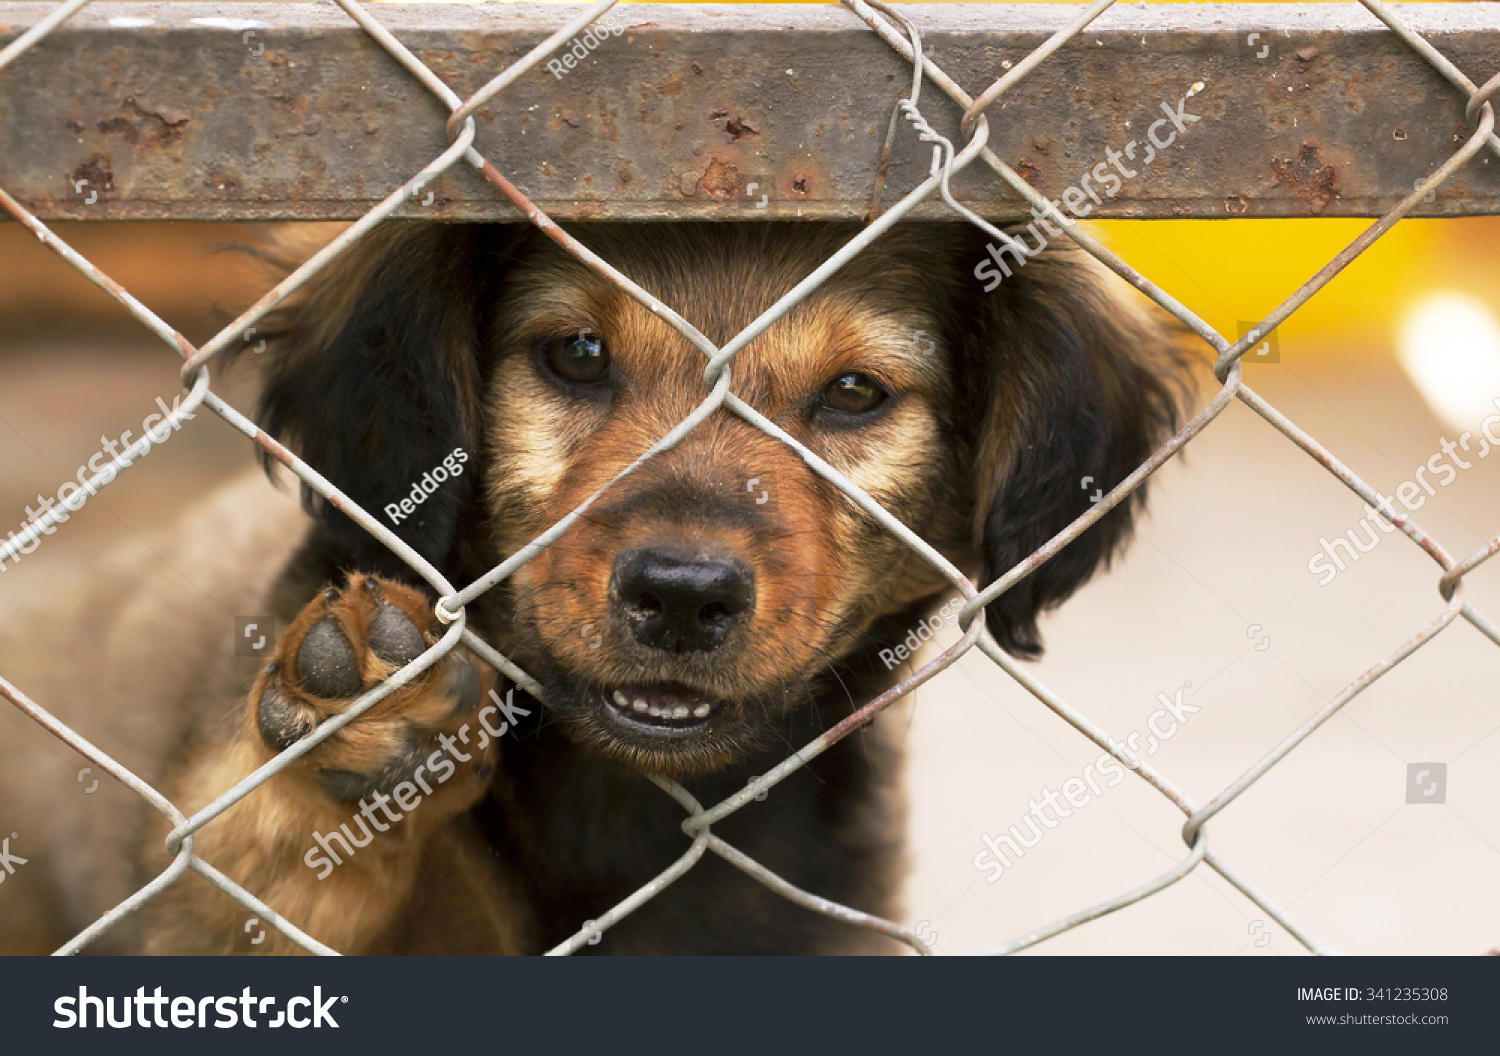 Lonely Dog Puppy Looking Behind A Fence Stock Photo 341235308 ...